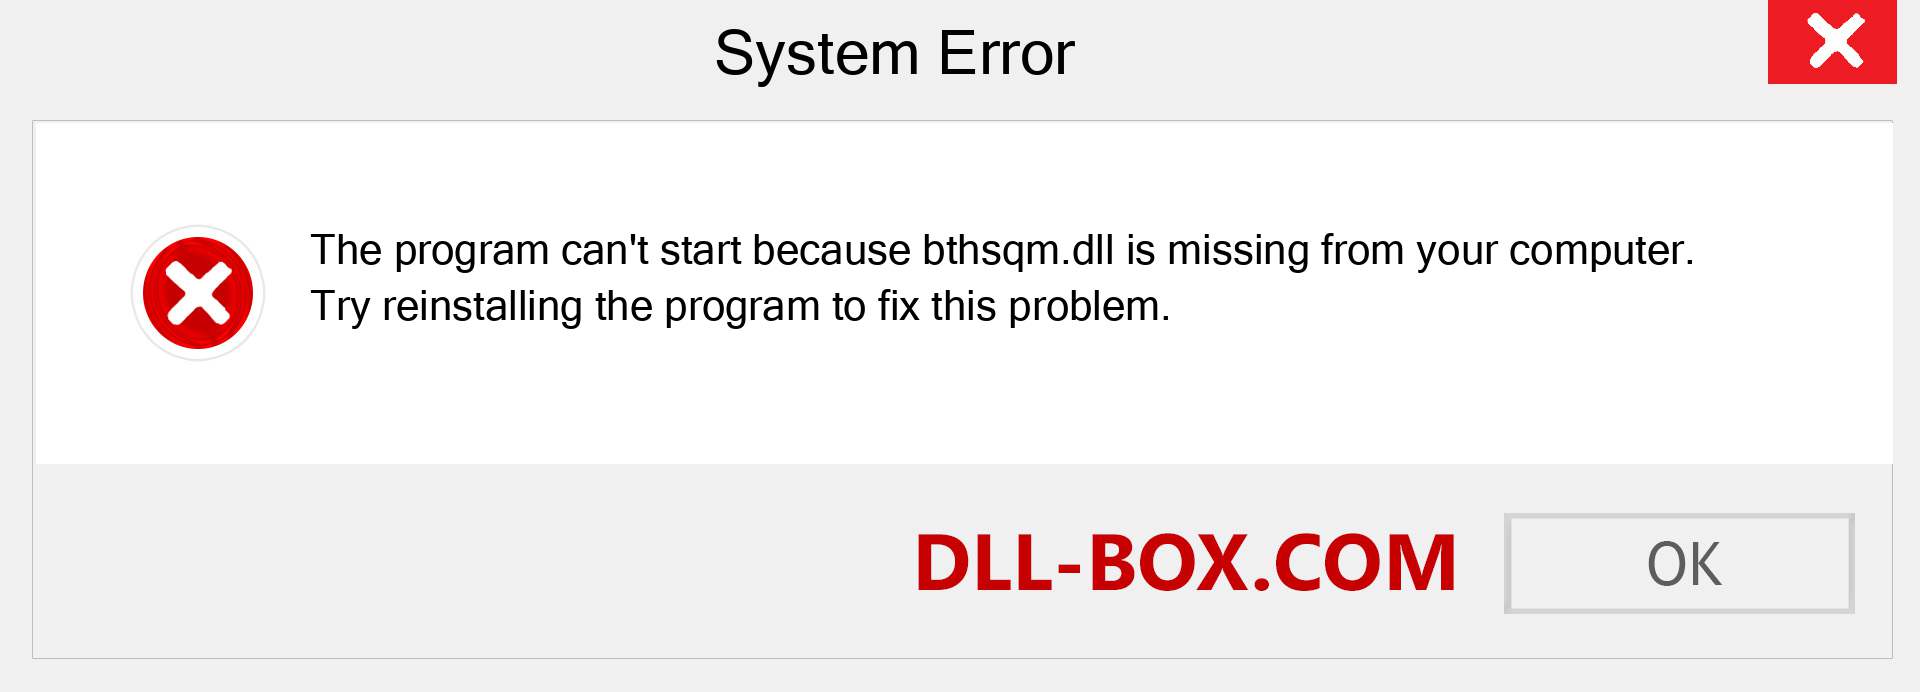  bthsqm.dll file is missing?. Download for Windows 7, 8, 10 - Fix  bthsqm dll Missing Error on Windows, photos, images